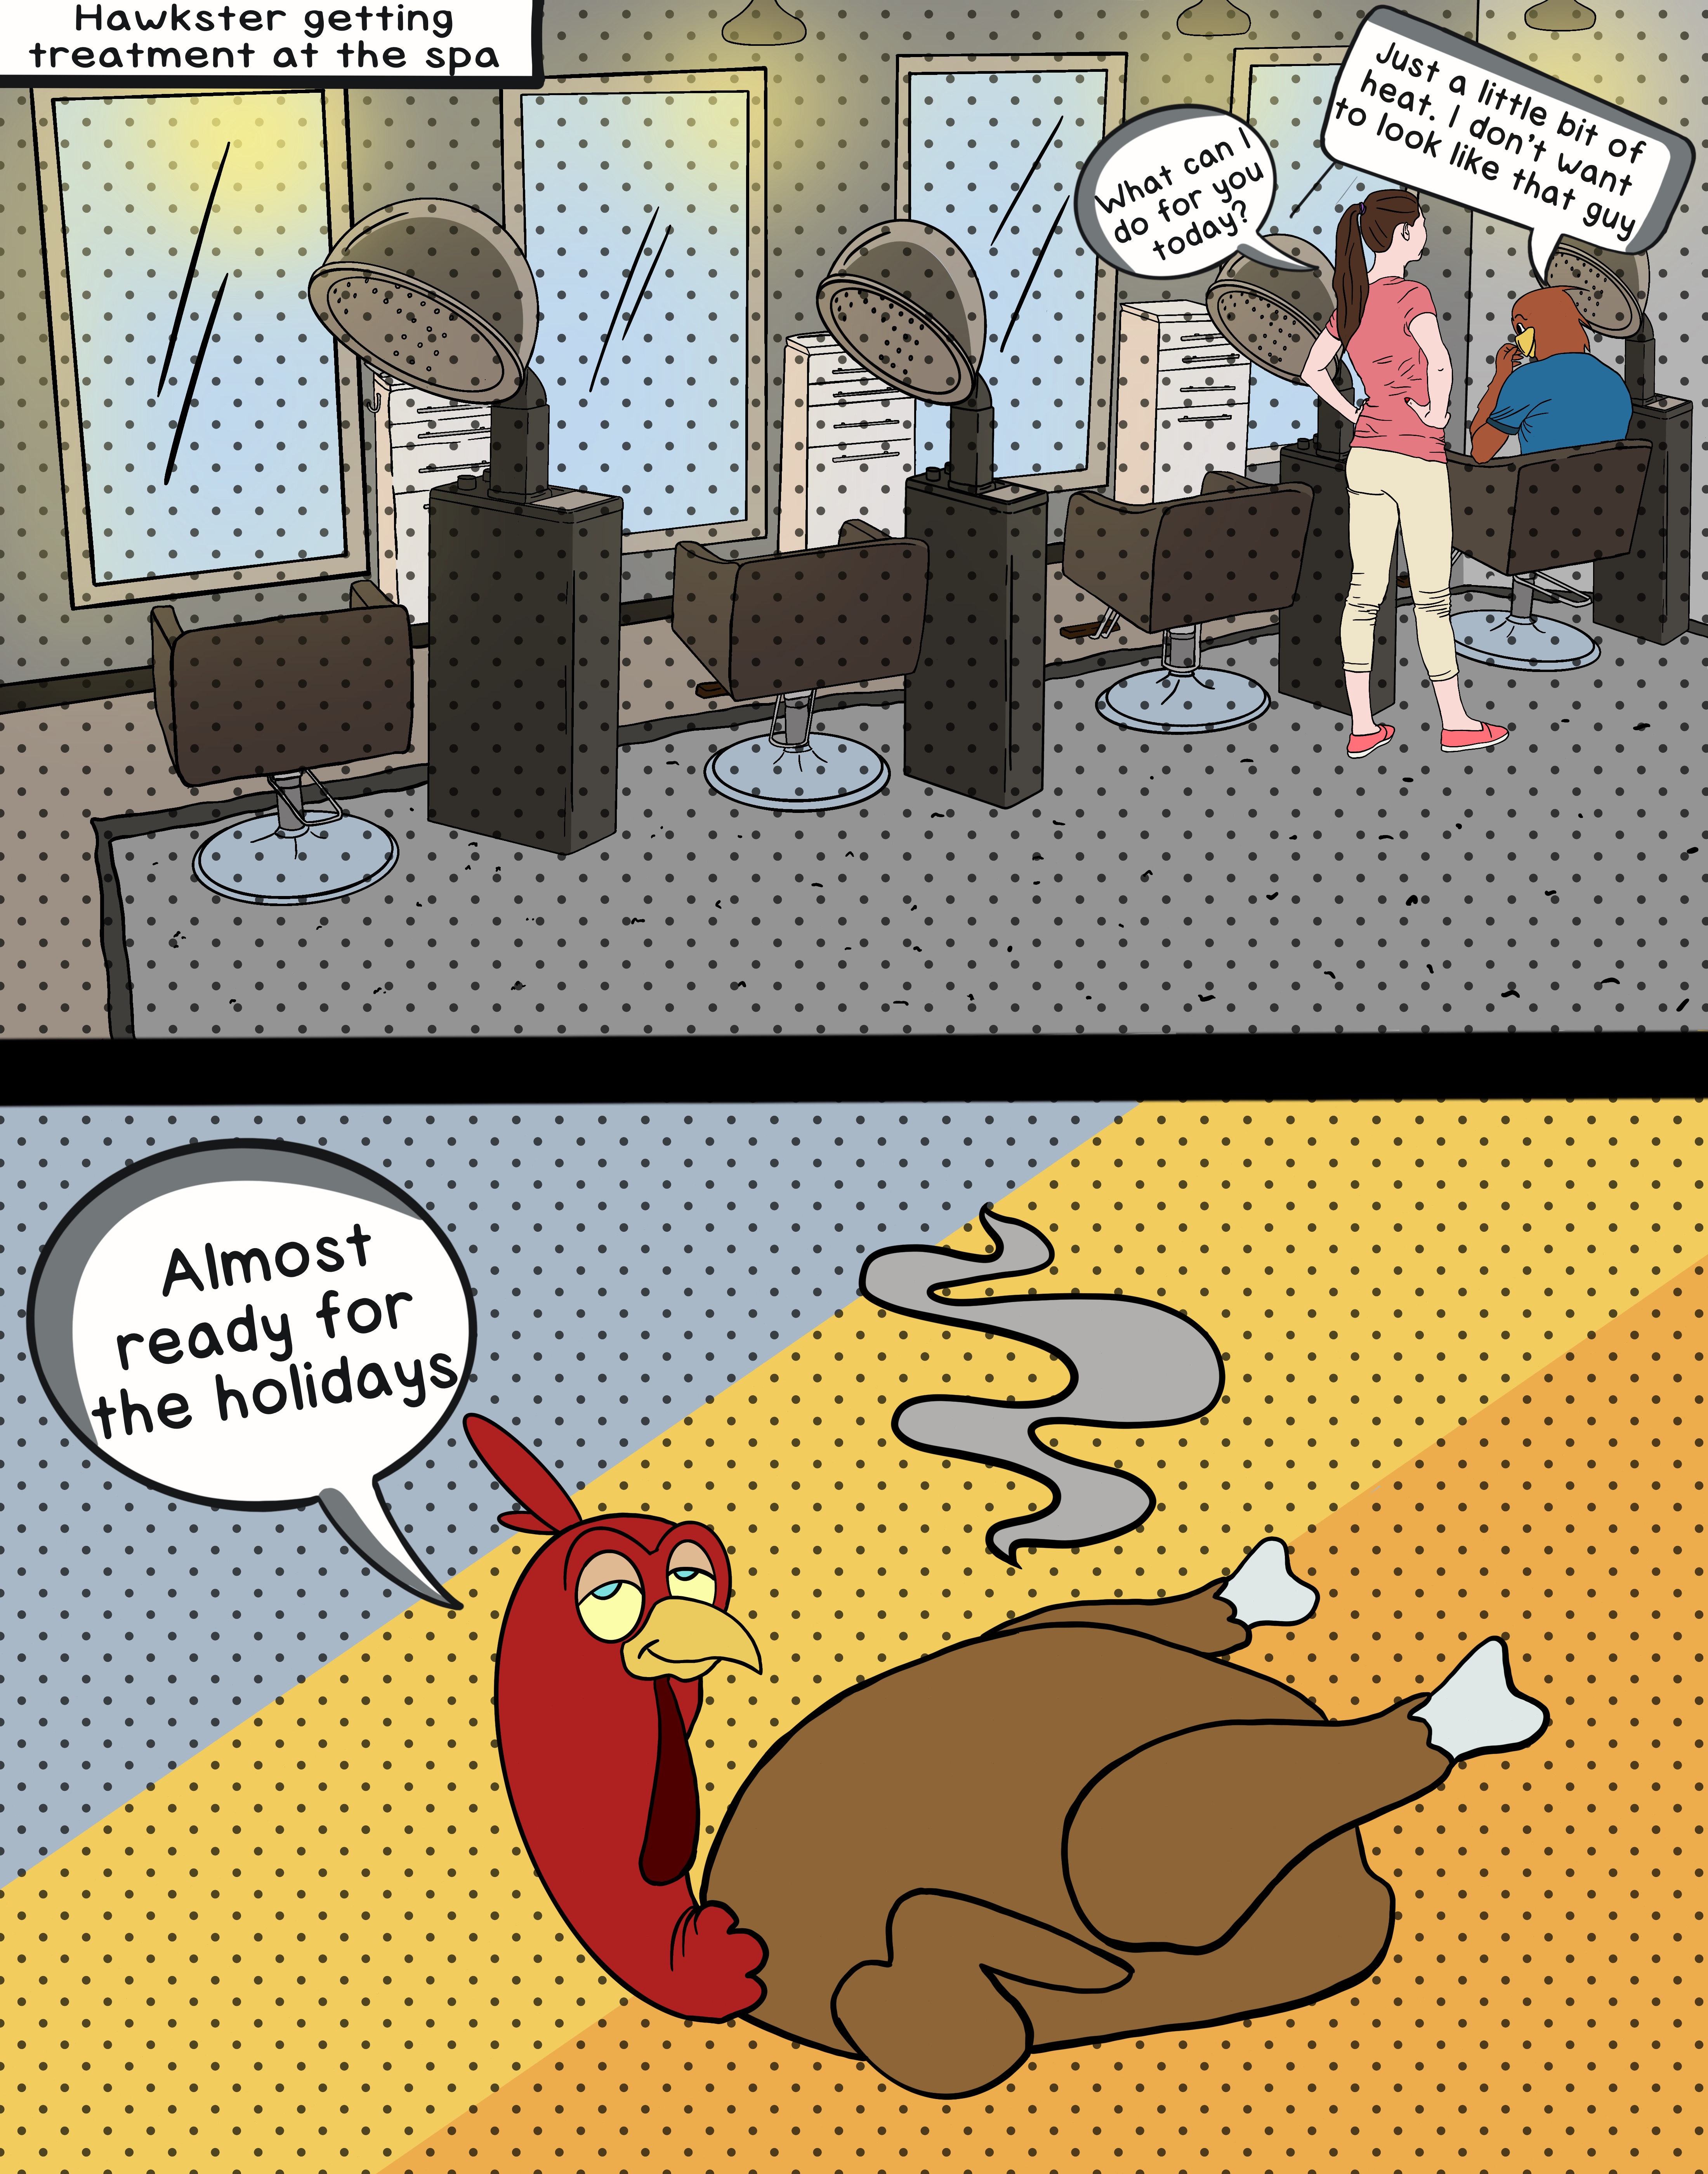 Comic of Hawkster going to the health spa to get ready for the holidays